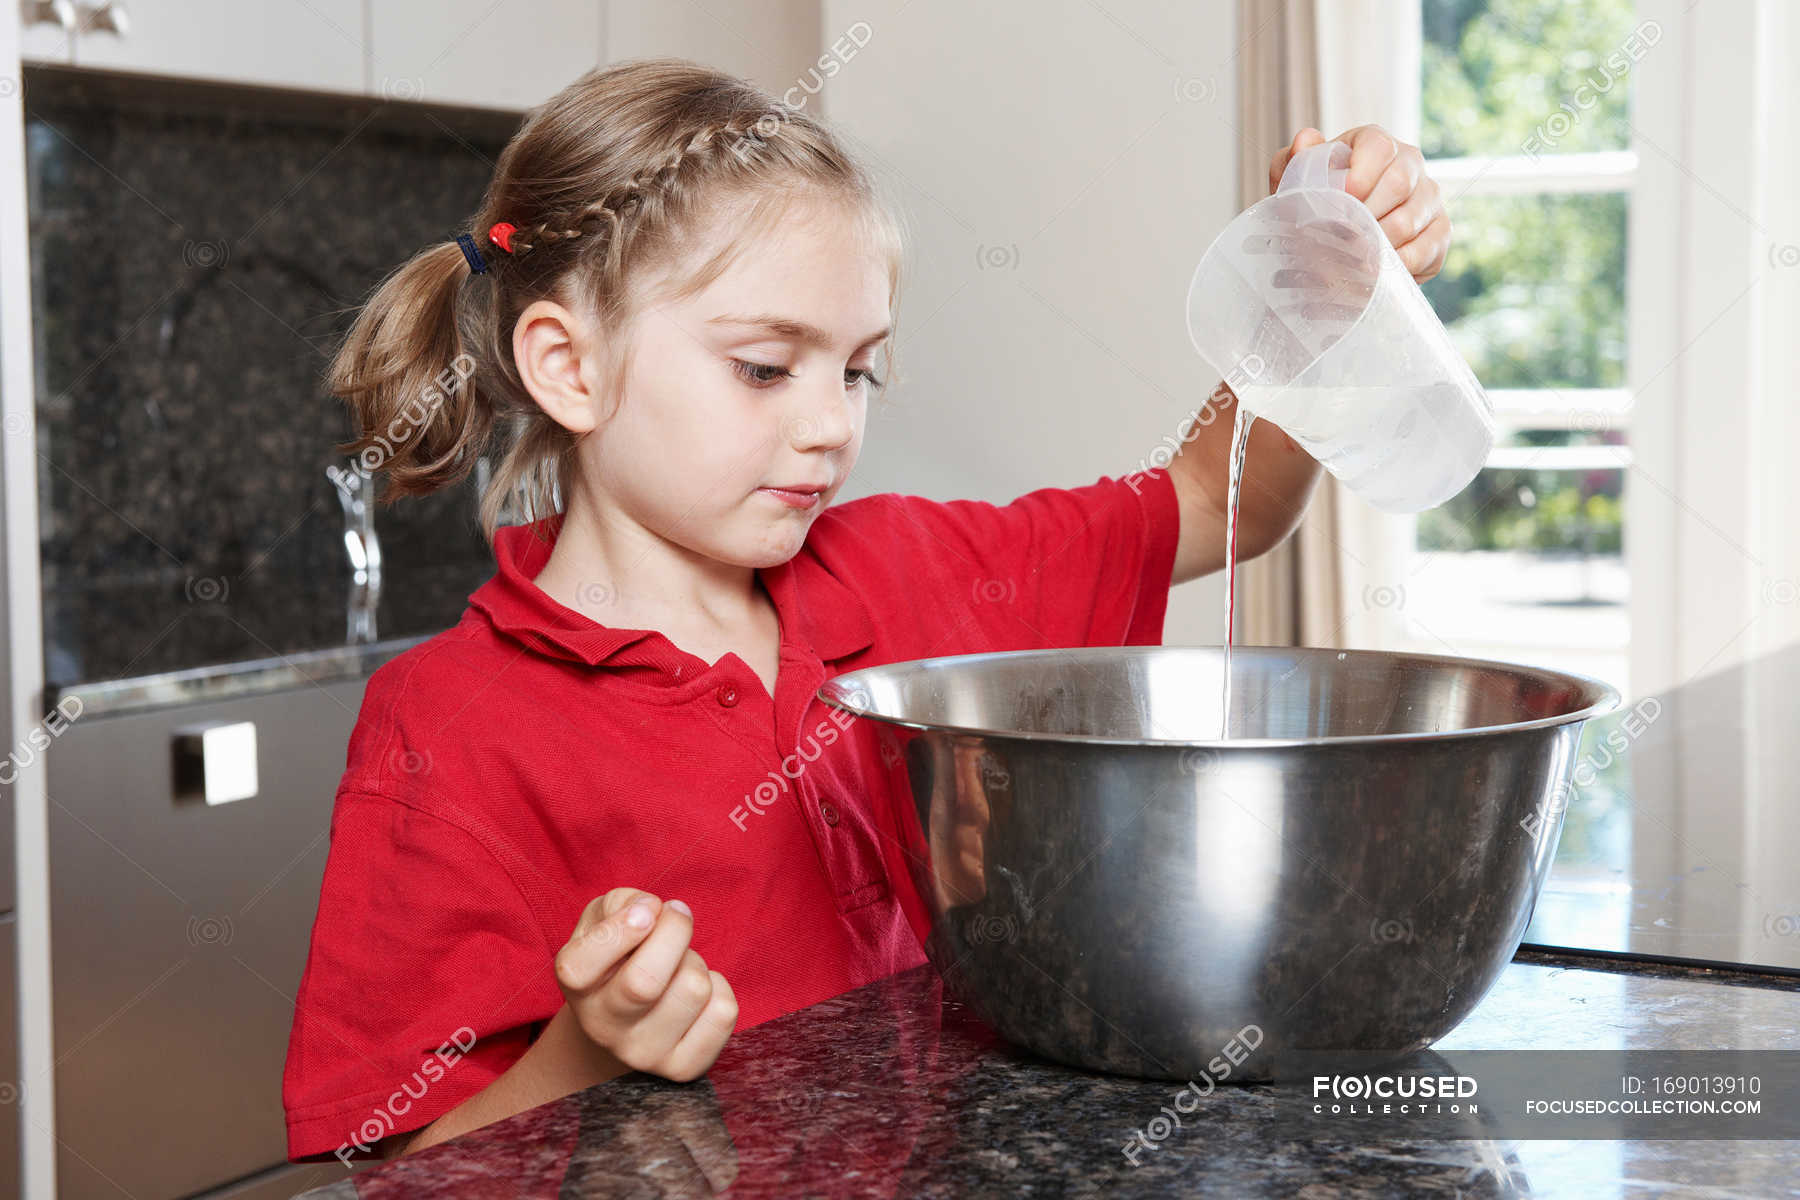 Girl Pouring Water In To Mixing Bowl Kid Counter Stock Photo